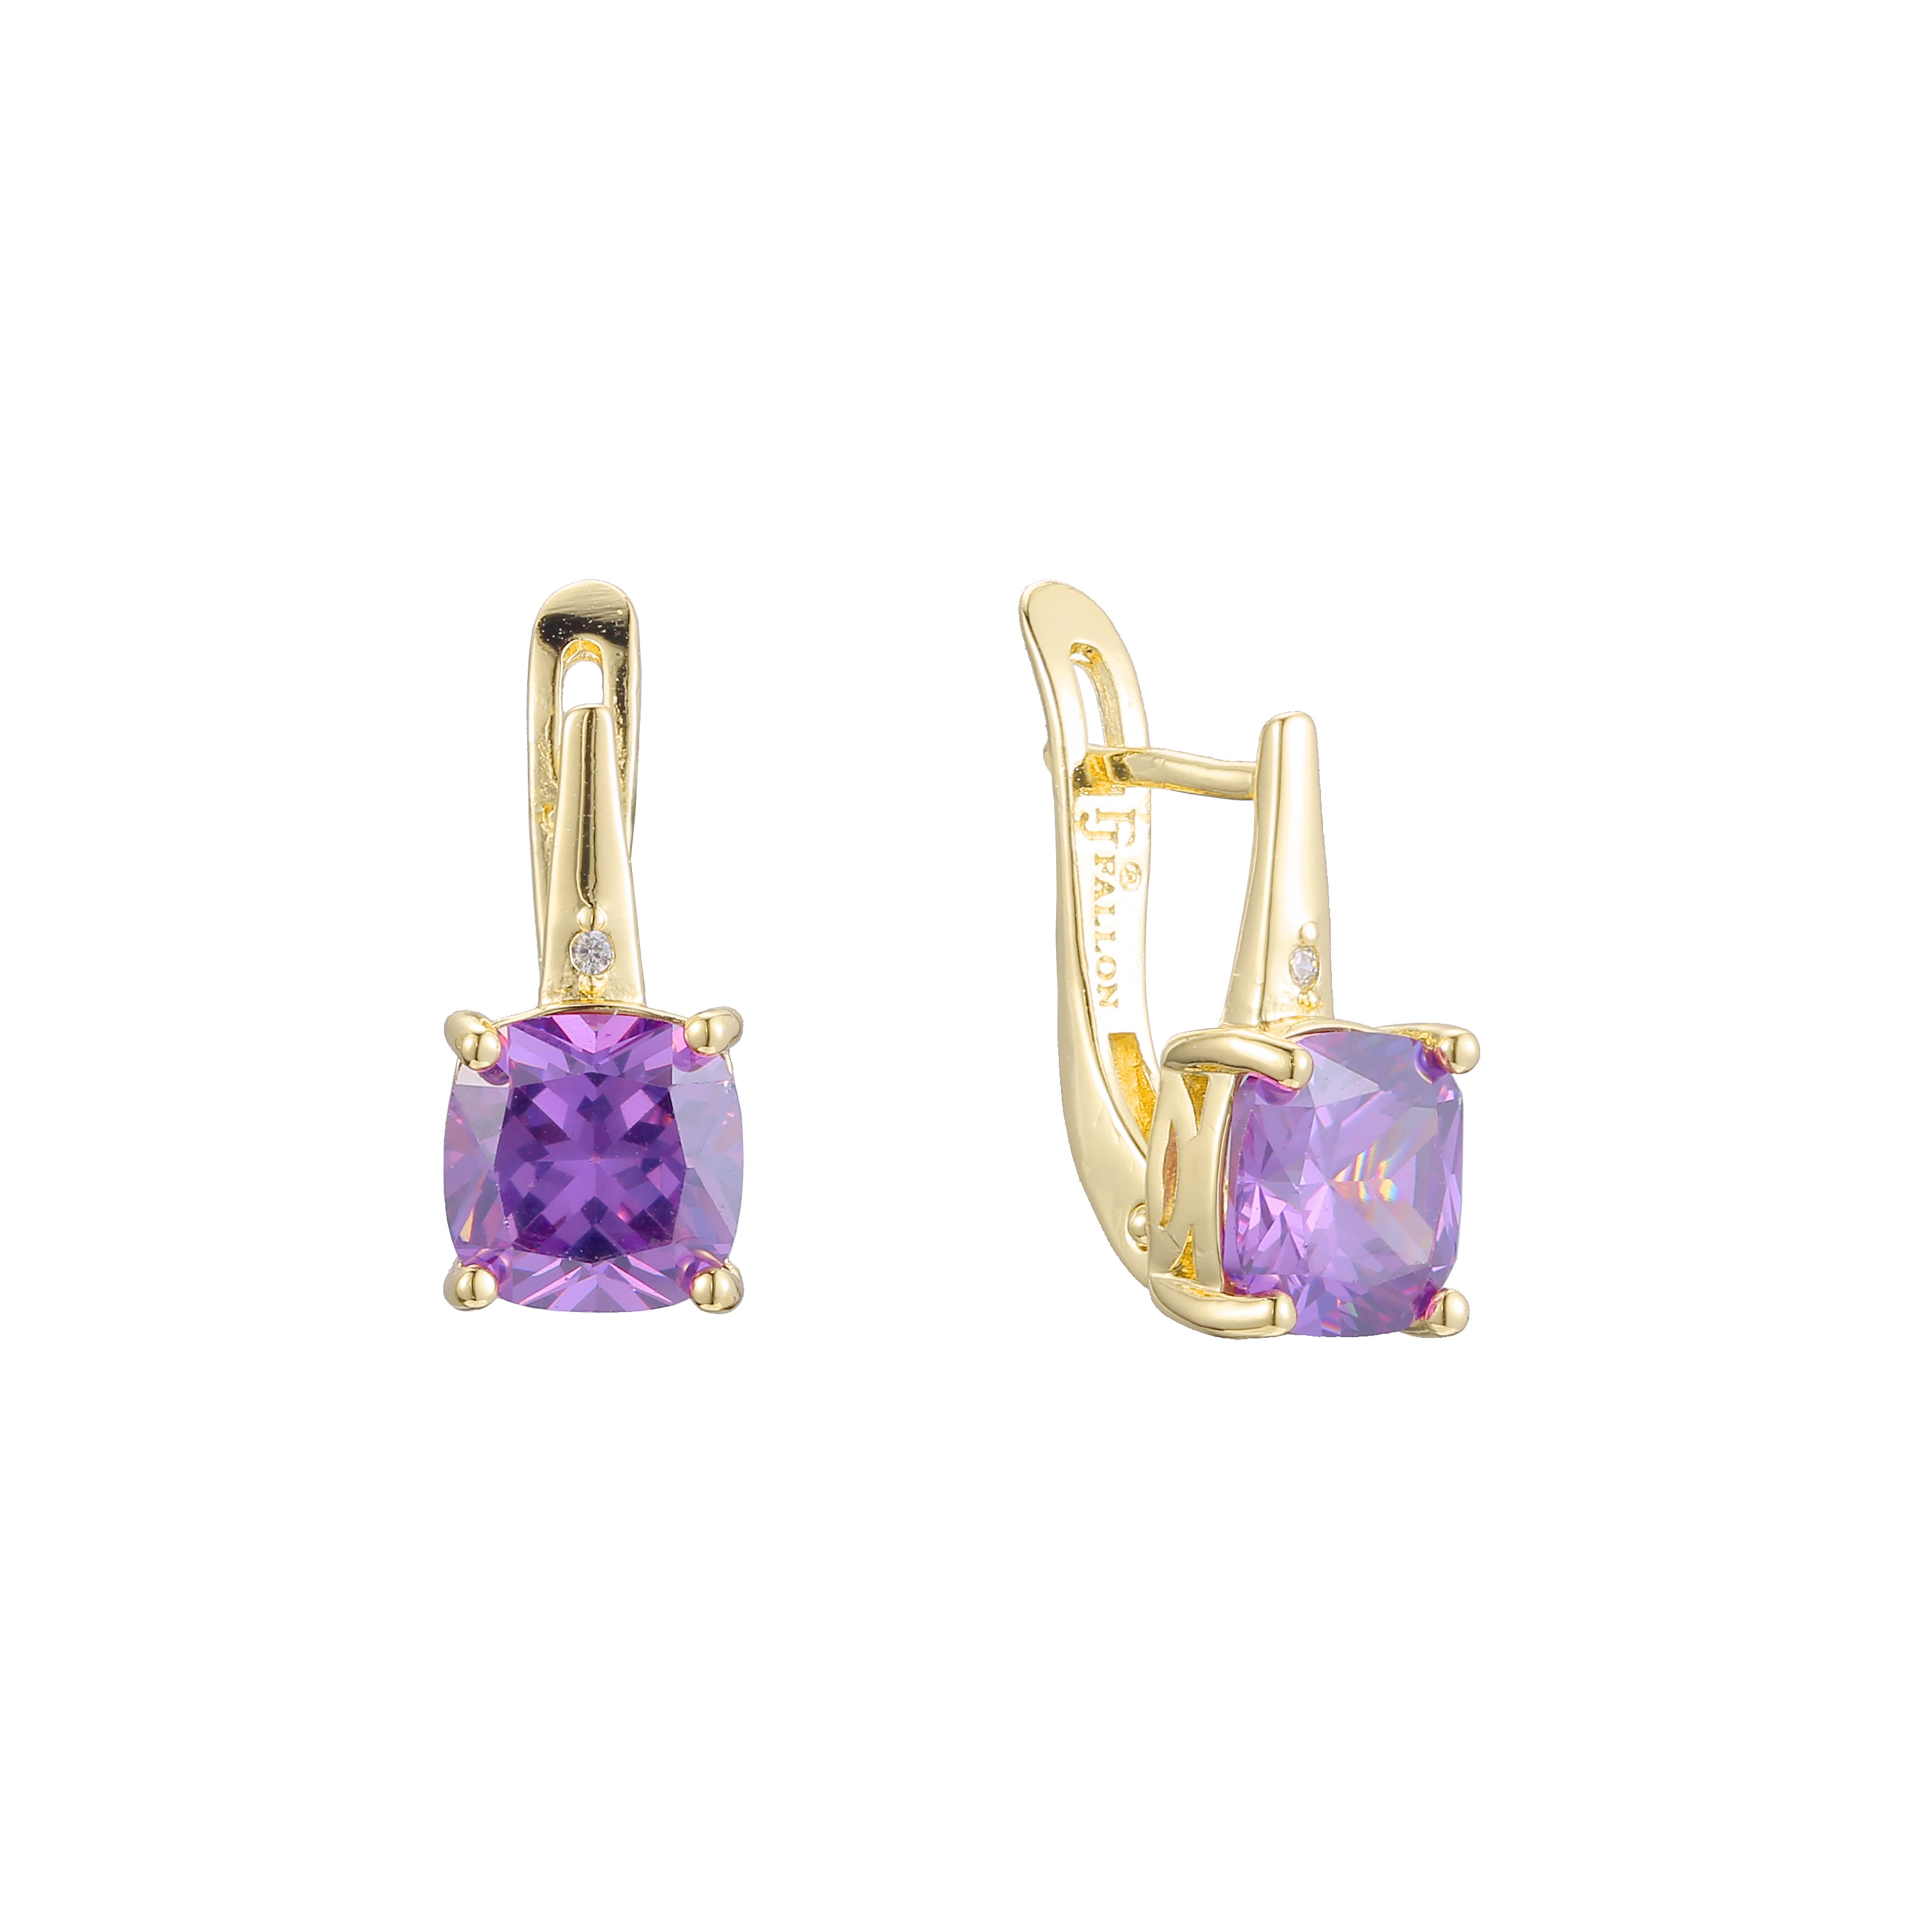 Solitaire earrings in 14K Gold, Rose Gold plating colors